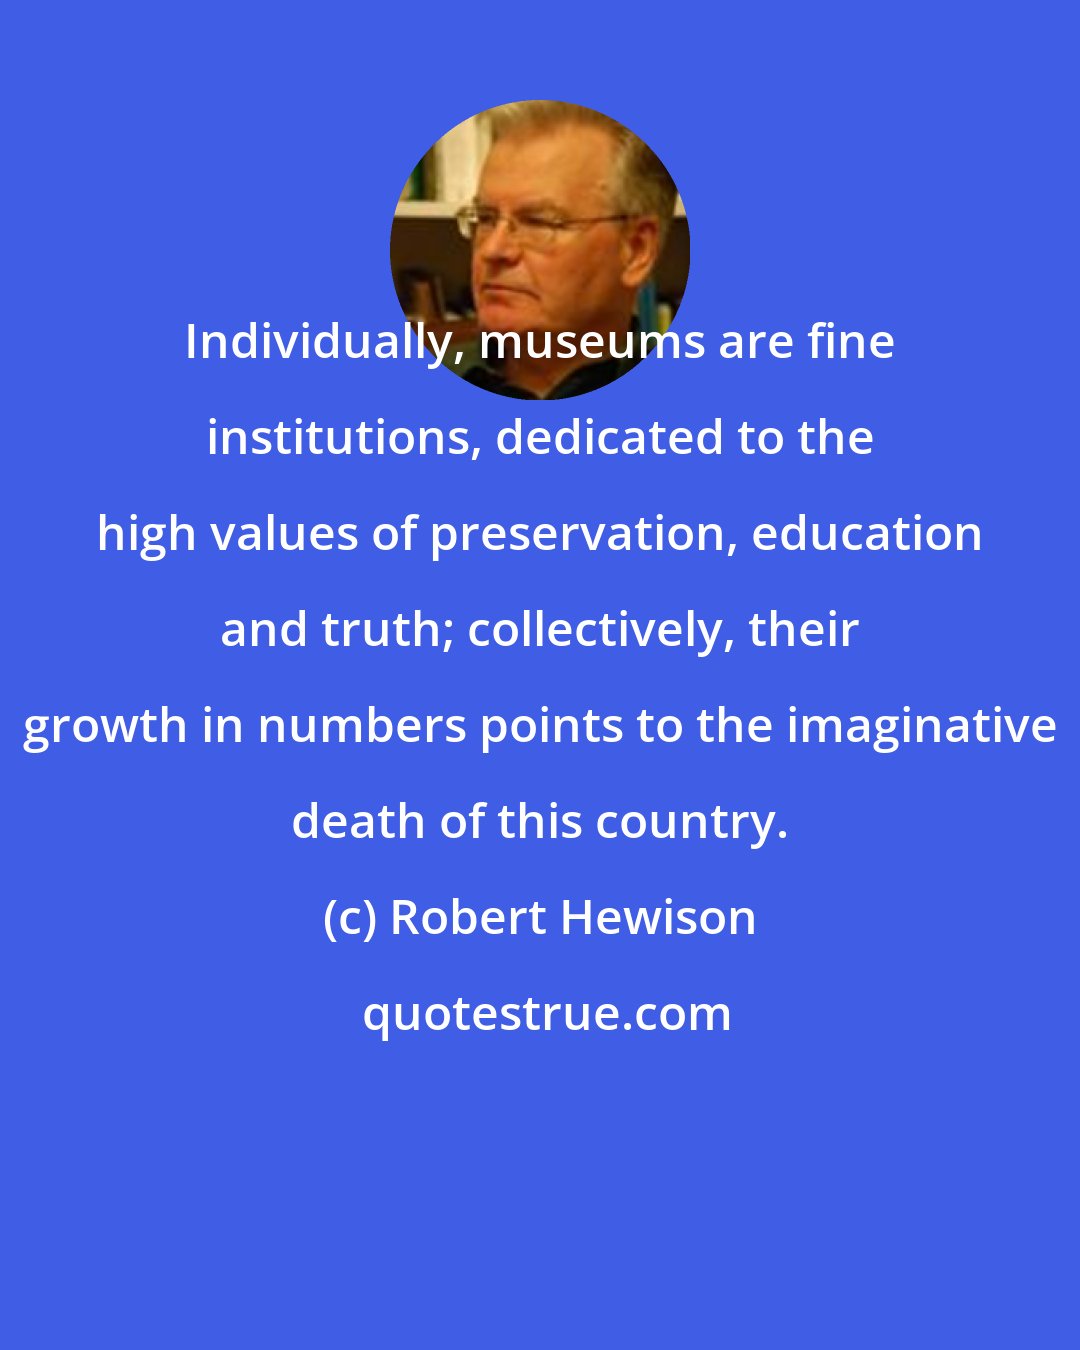 Robert Hewison: Individually, museums are fine institutions, dedicated to the high values of preservation, education and truth; collectively, their growth in numbers points to the imaginative death of this country.